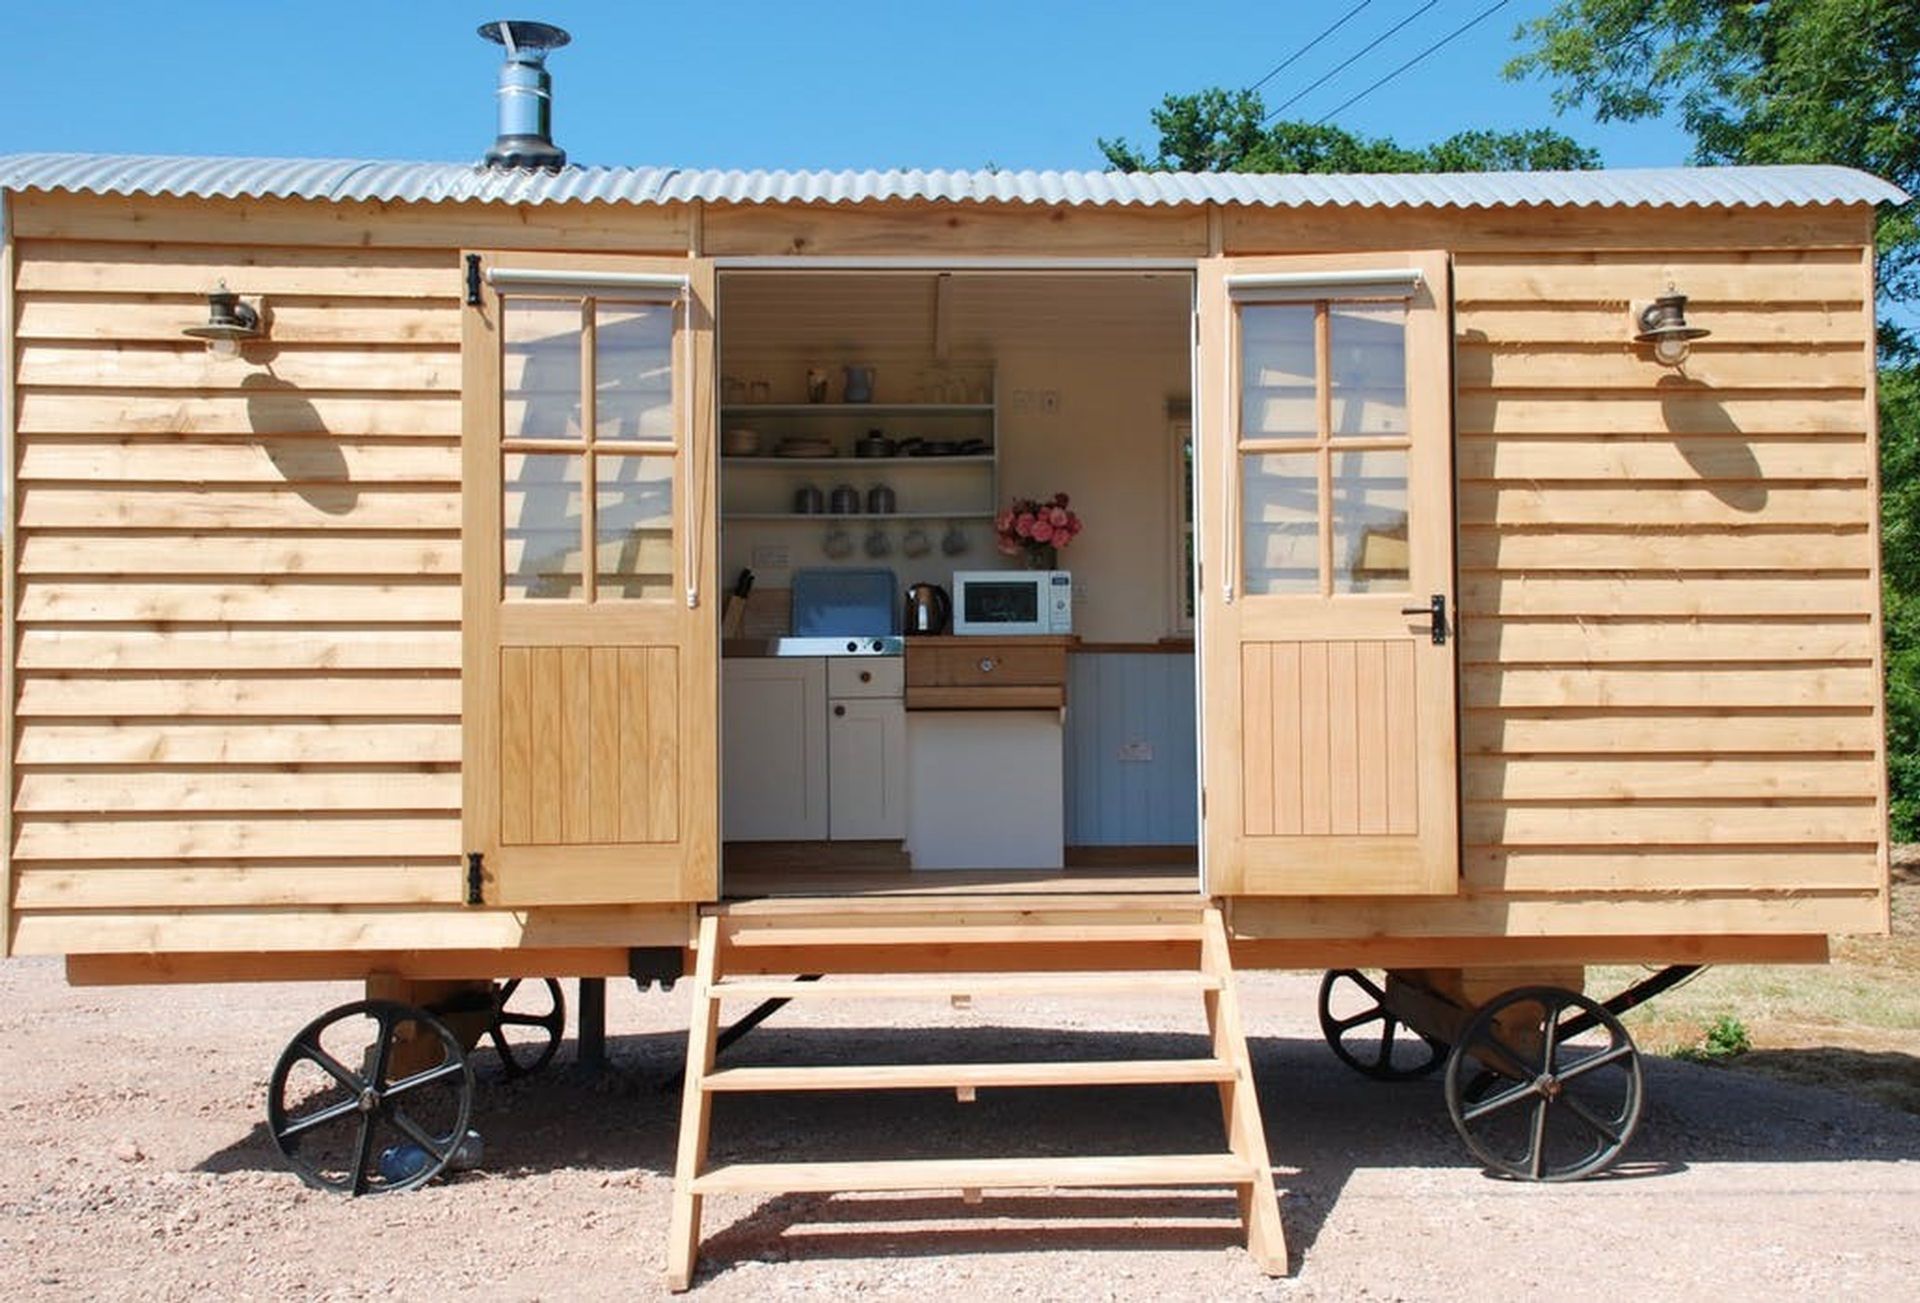 More information about Apple the shepherd's hut - ideal for a family holiday